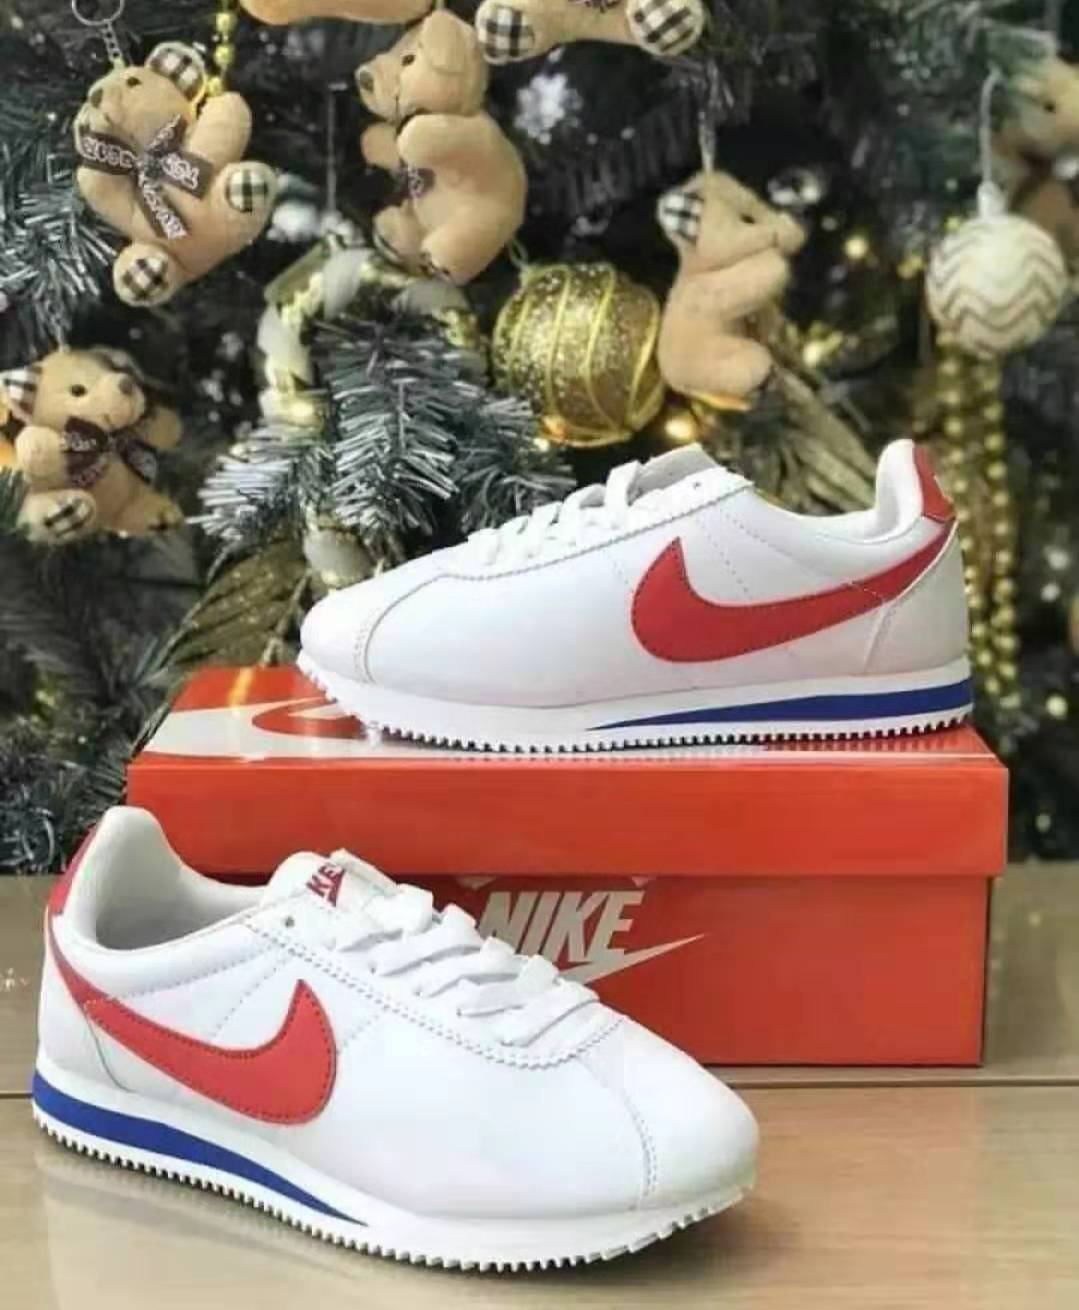 Nike \u003dCortez sports running shoes for MEN and Women | Lazada PH